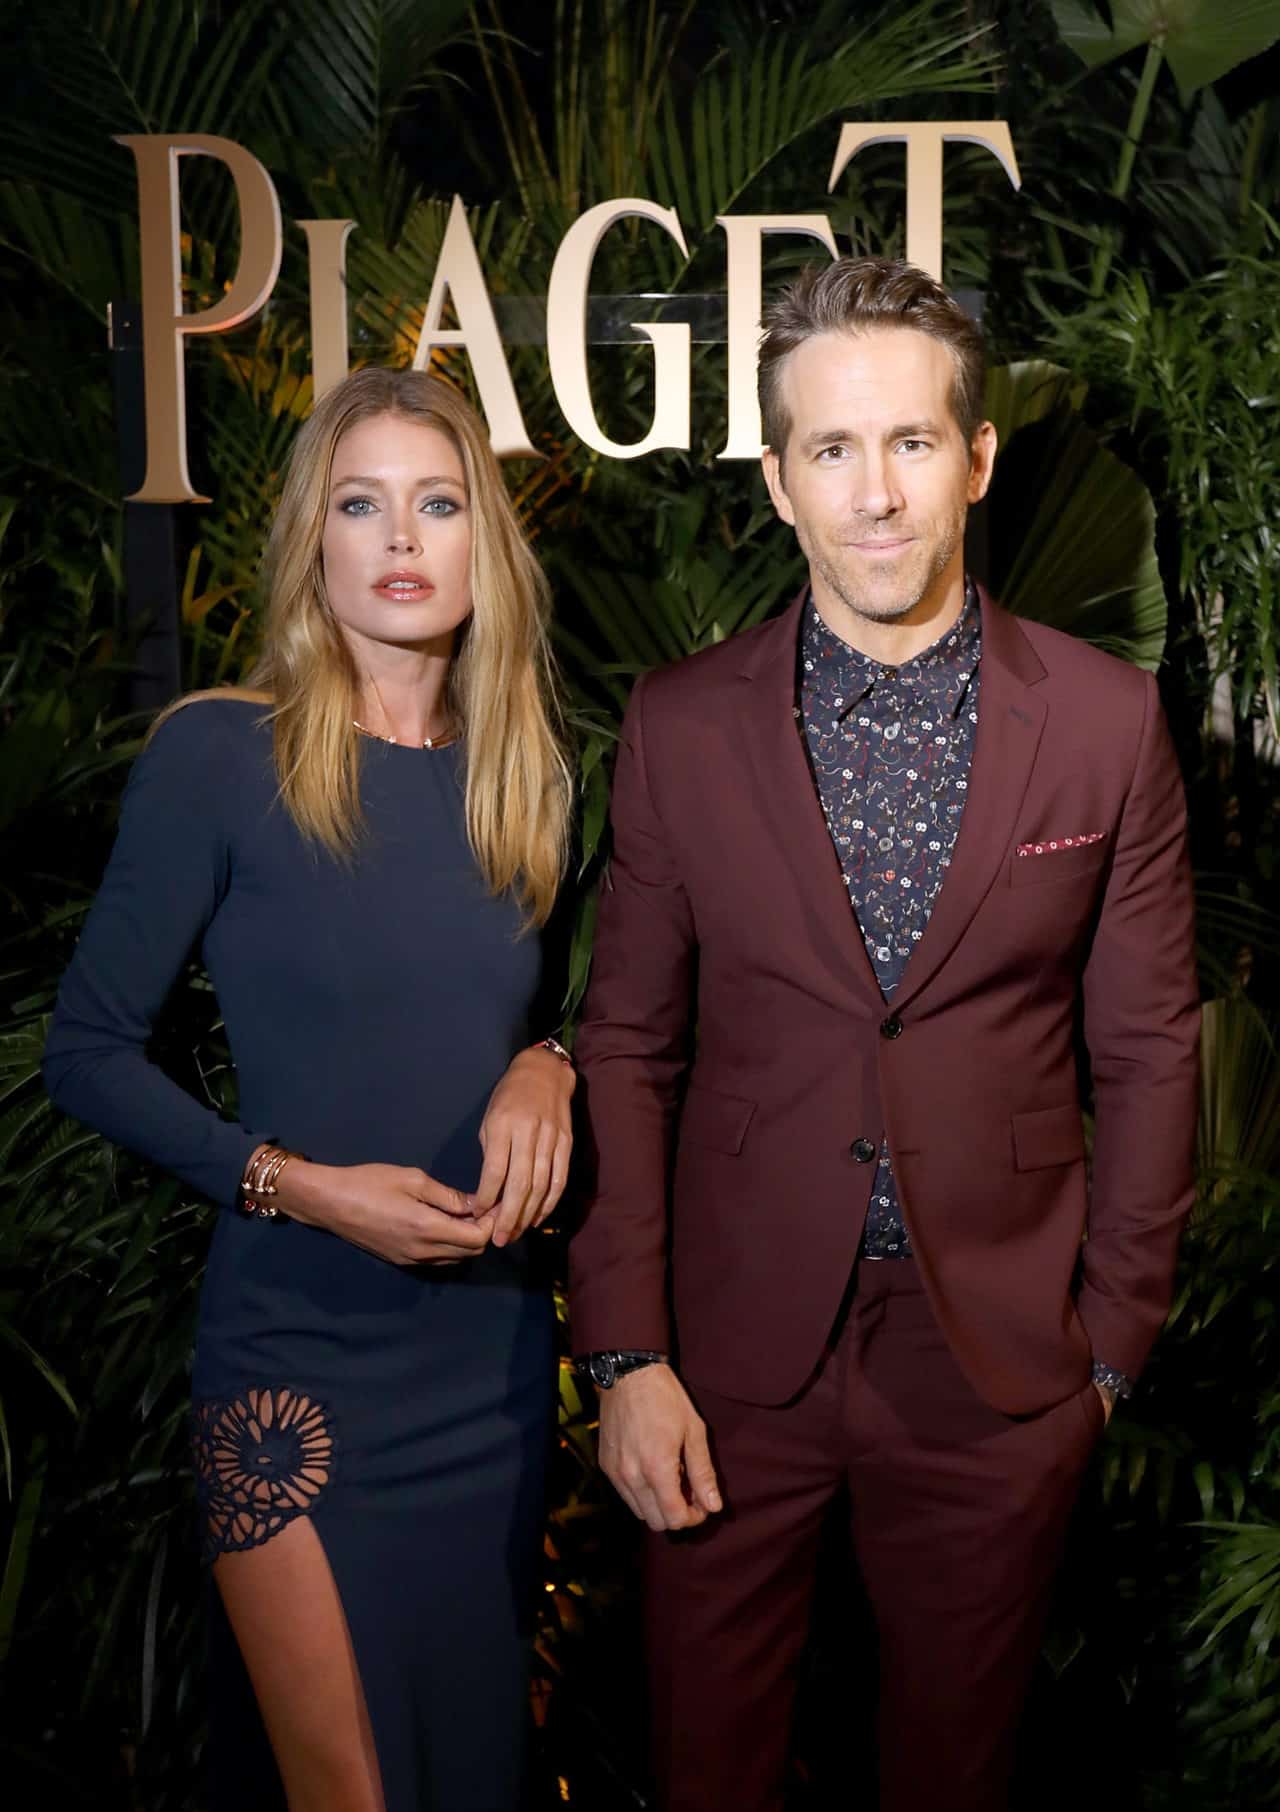 GENEVA, SWITZERLAND - JANUARY 15:  Doutzen Kroes and brand ambassador Ryan Reynolds attend the #Piaget dinner at the Country Club during the #SIHH2018 on January 15, 2018 in Geneva, Switzerland.  (Photo by Remy Steiner/Getty Images for Piaget) *** Local Caption *** Doutzen Kroes; Ryan Reynolds